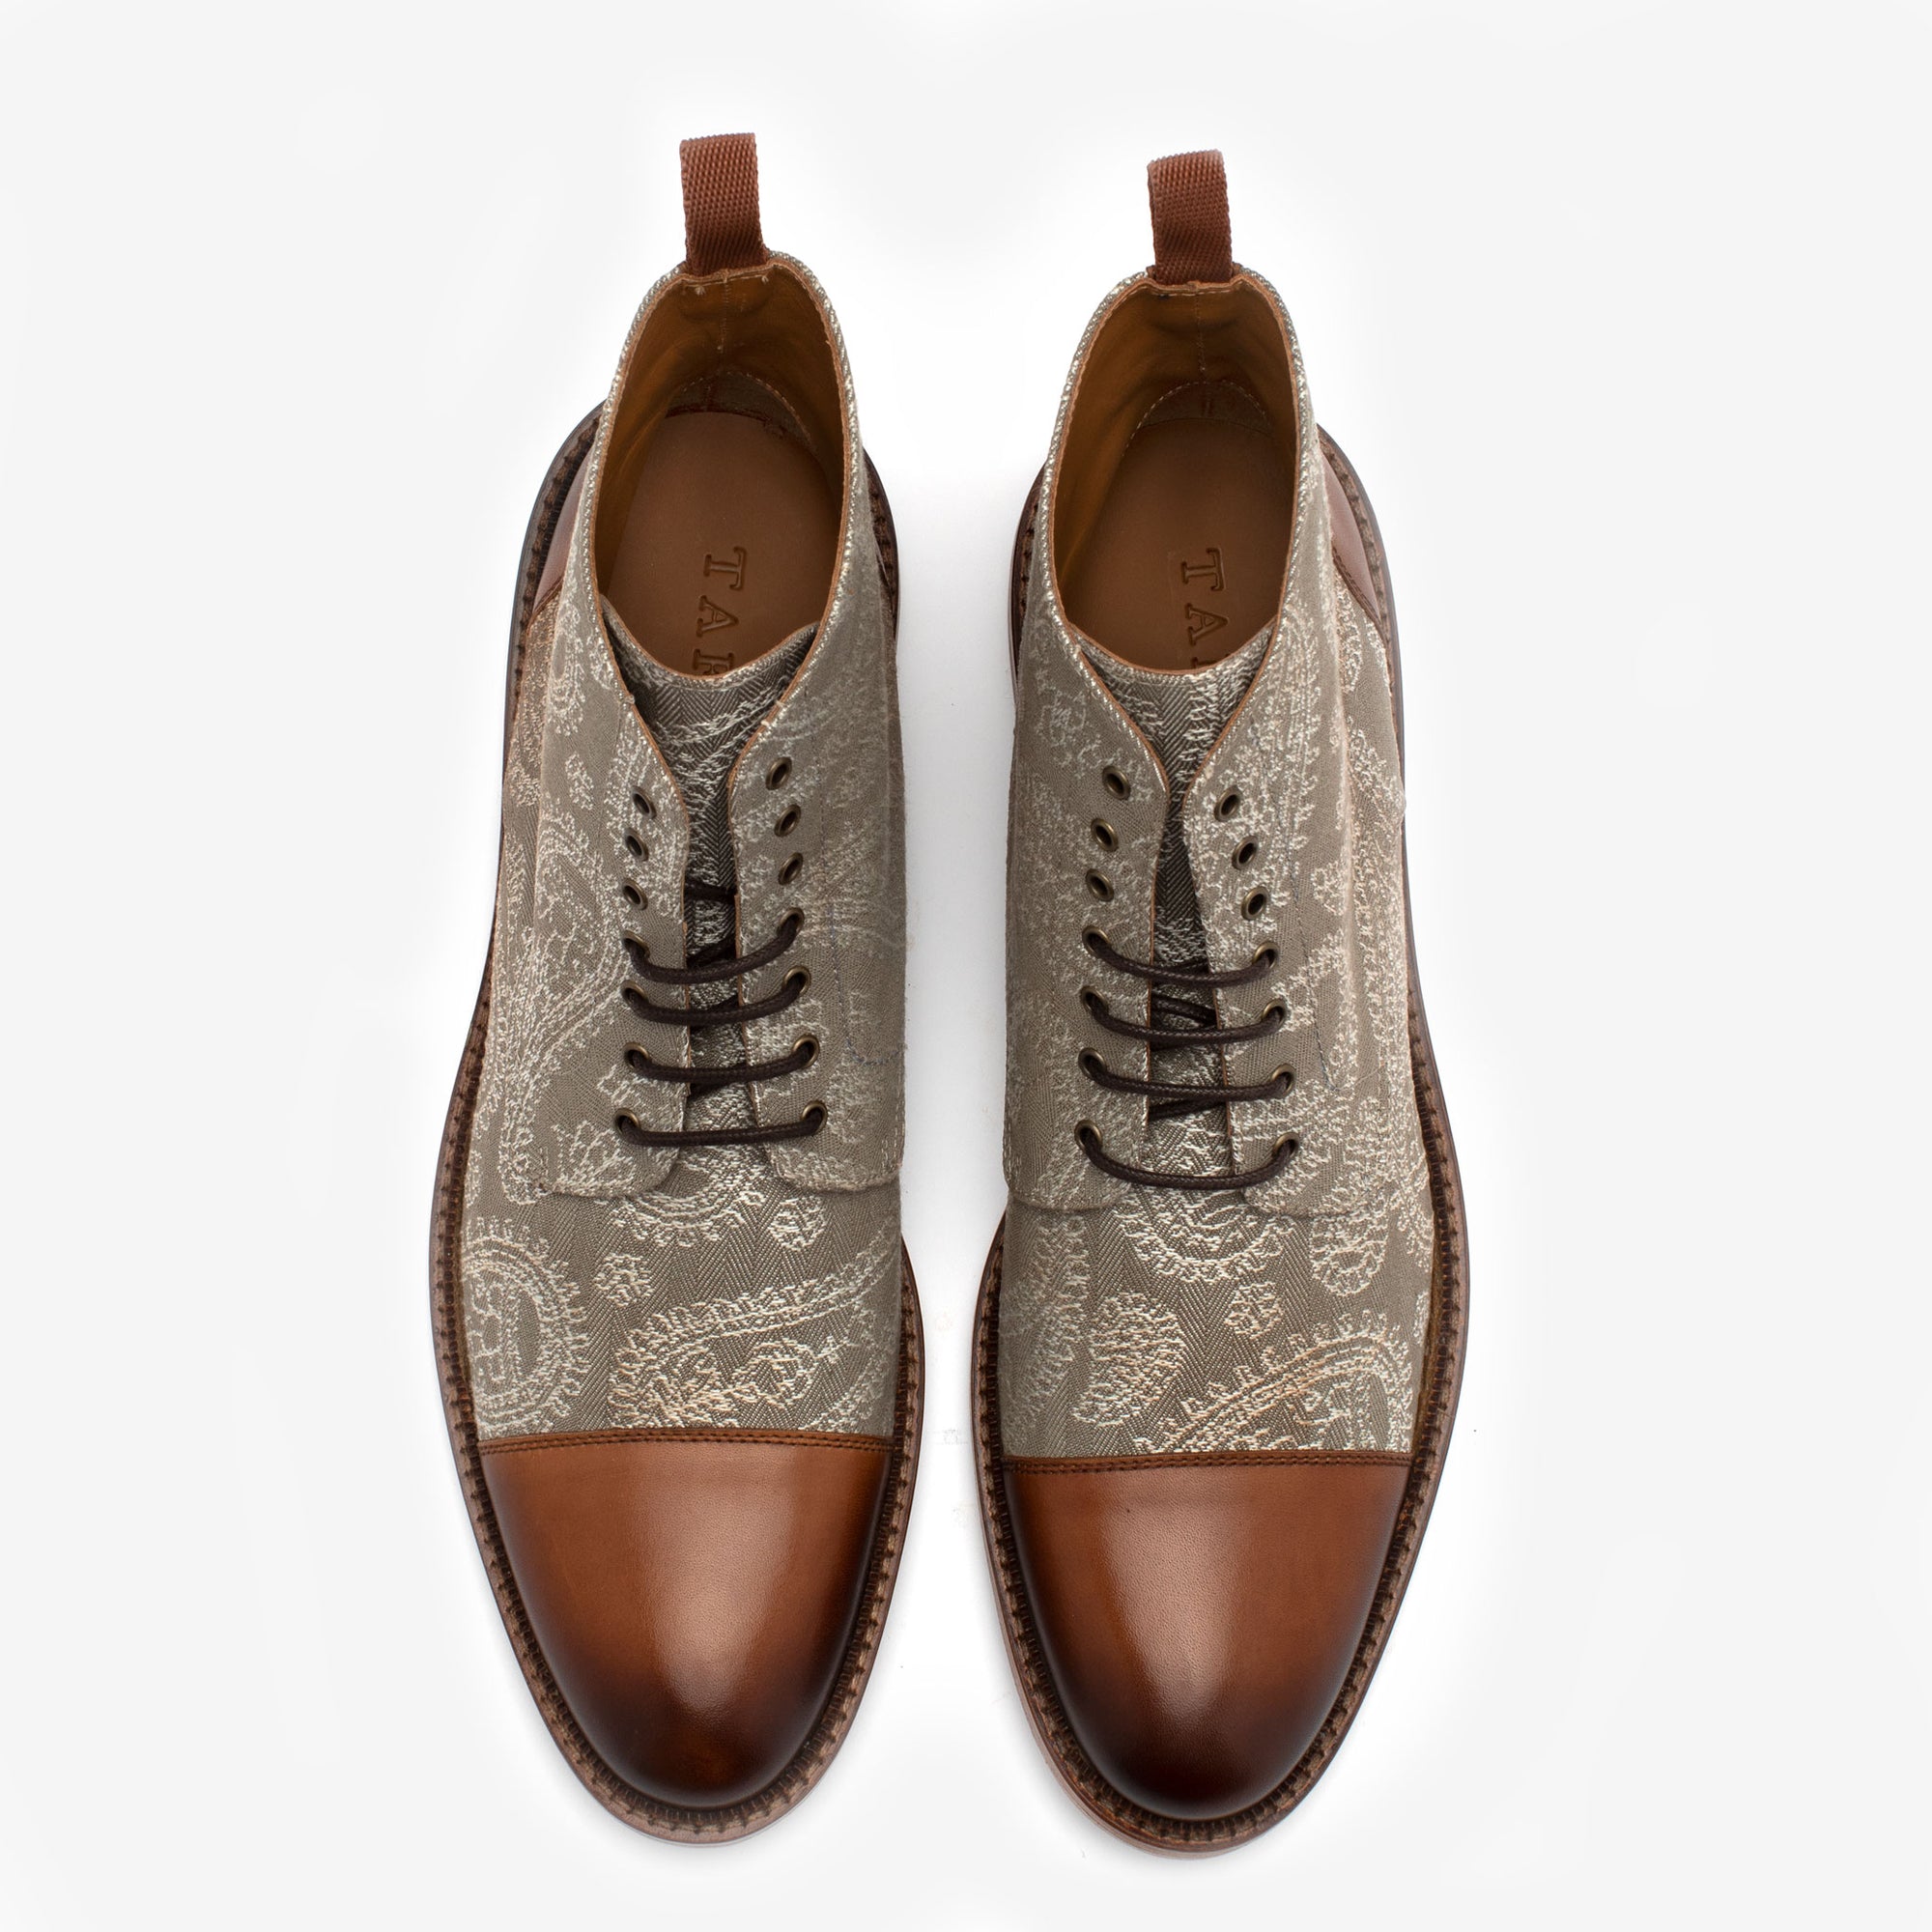 The Jack Boot in Taupe Paisley